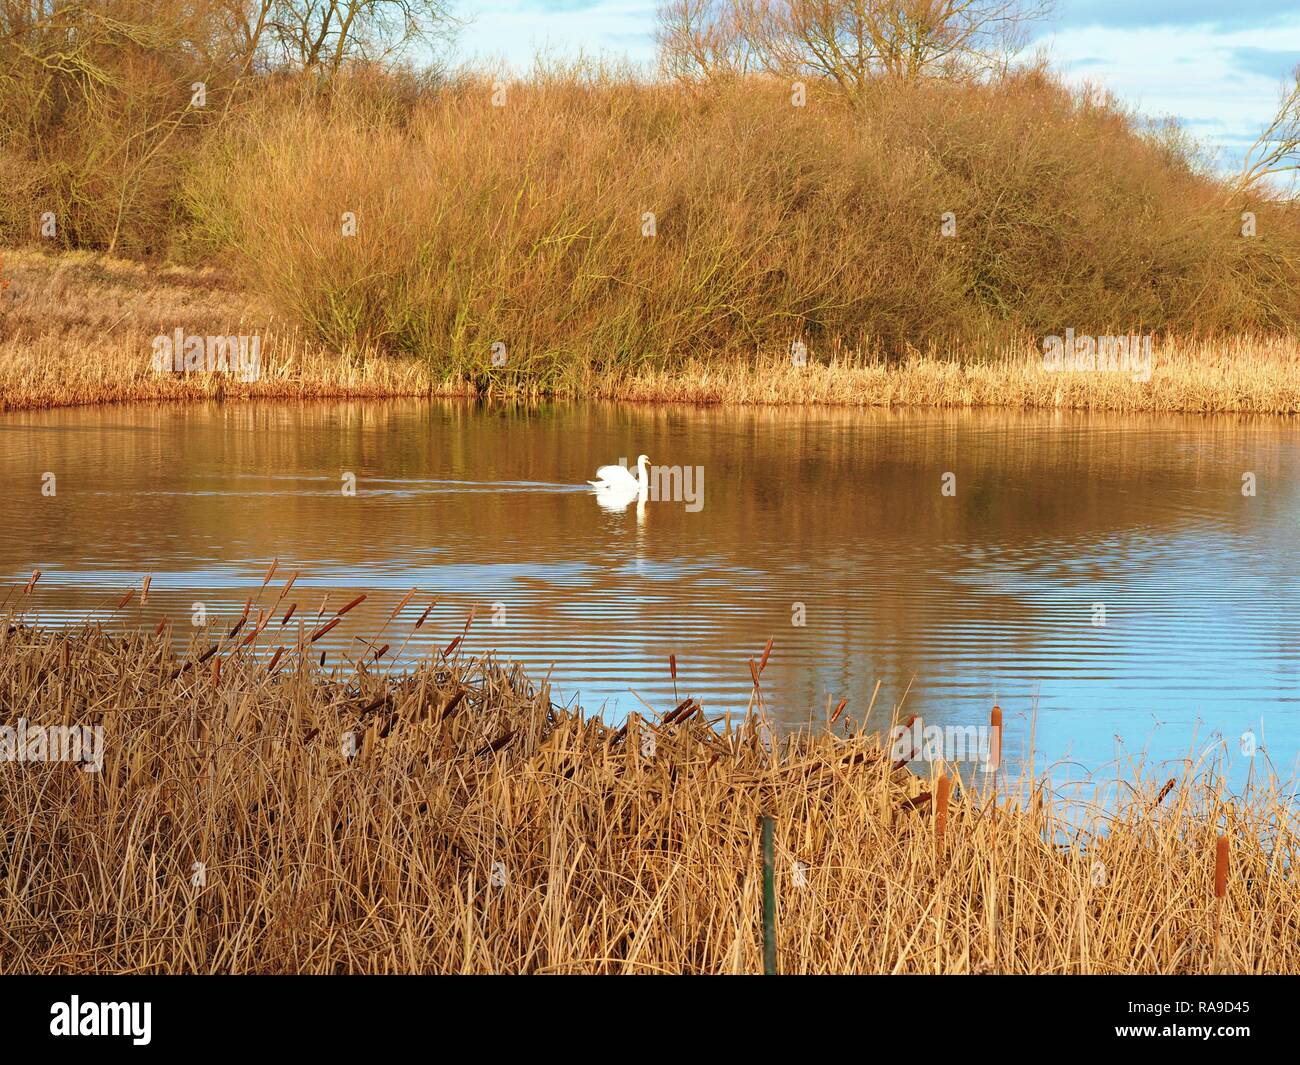 Single mute swan (Cygnus olor) in a lake surrounded by golden autumn reeds at Staveley Nature Reserve, North Yorkshire, England Stock Photo